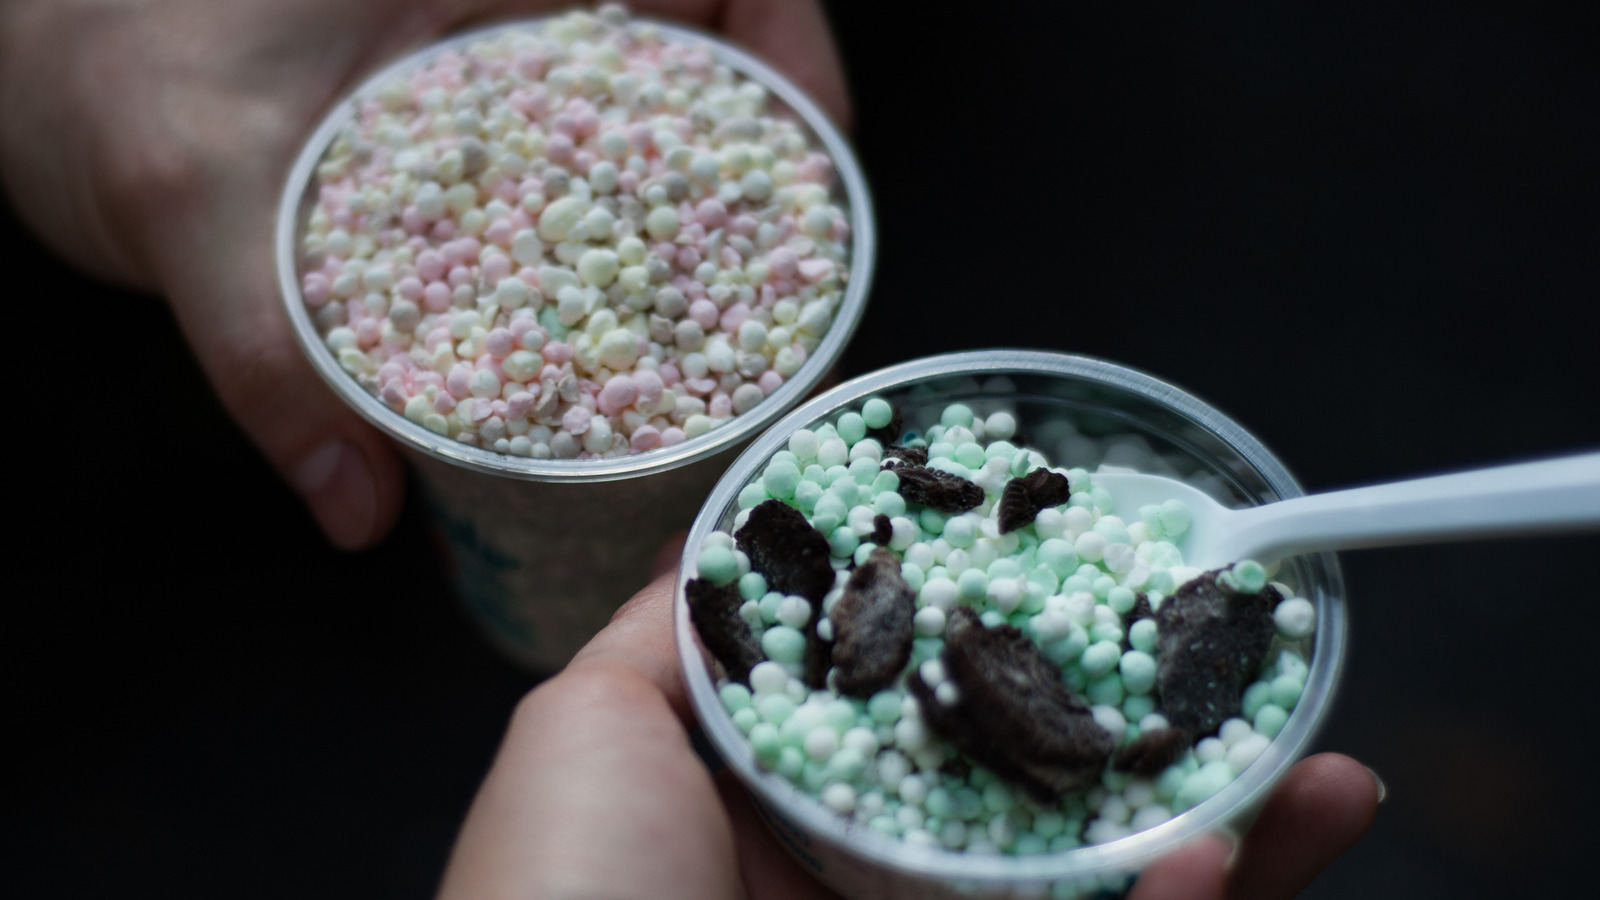 https://www.thedailymeal.com/img/gallery/the-intense-science-that-helped-create-dippin-dots/l-intro-1674069132.jpg